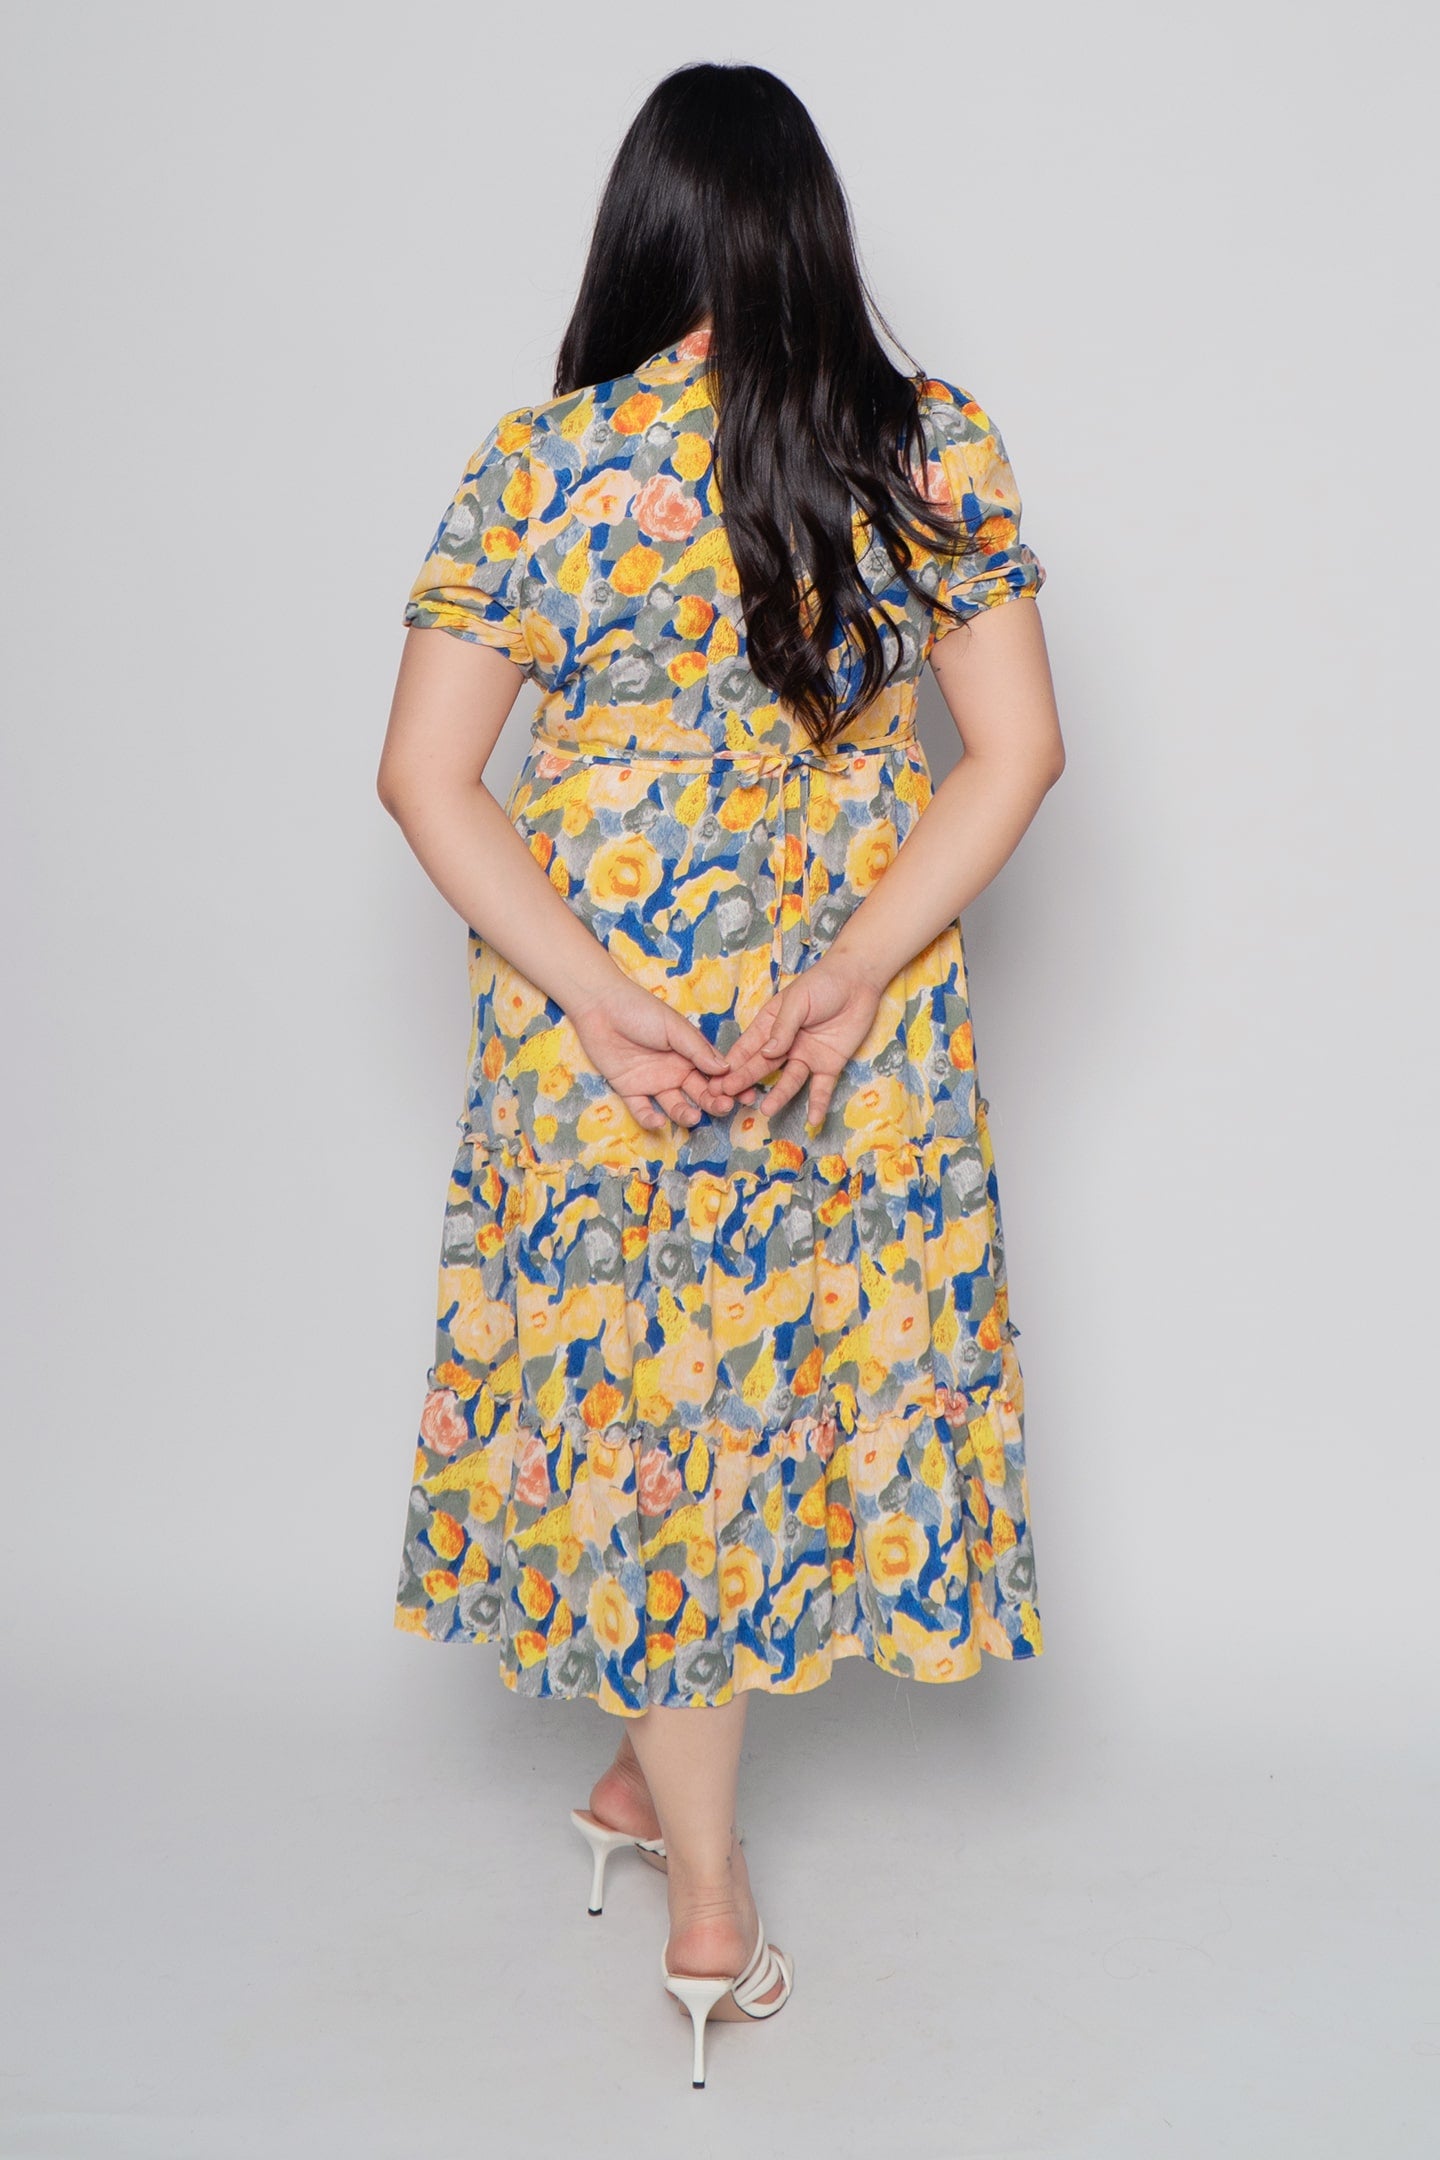 Backorders Aurora Dress in Yellow Beauty ( arriving after CNY )